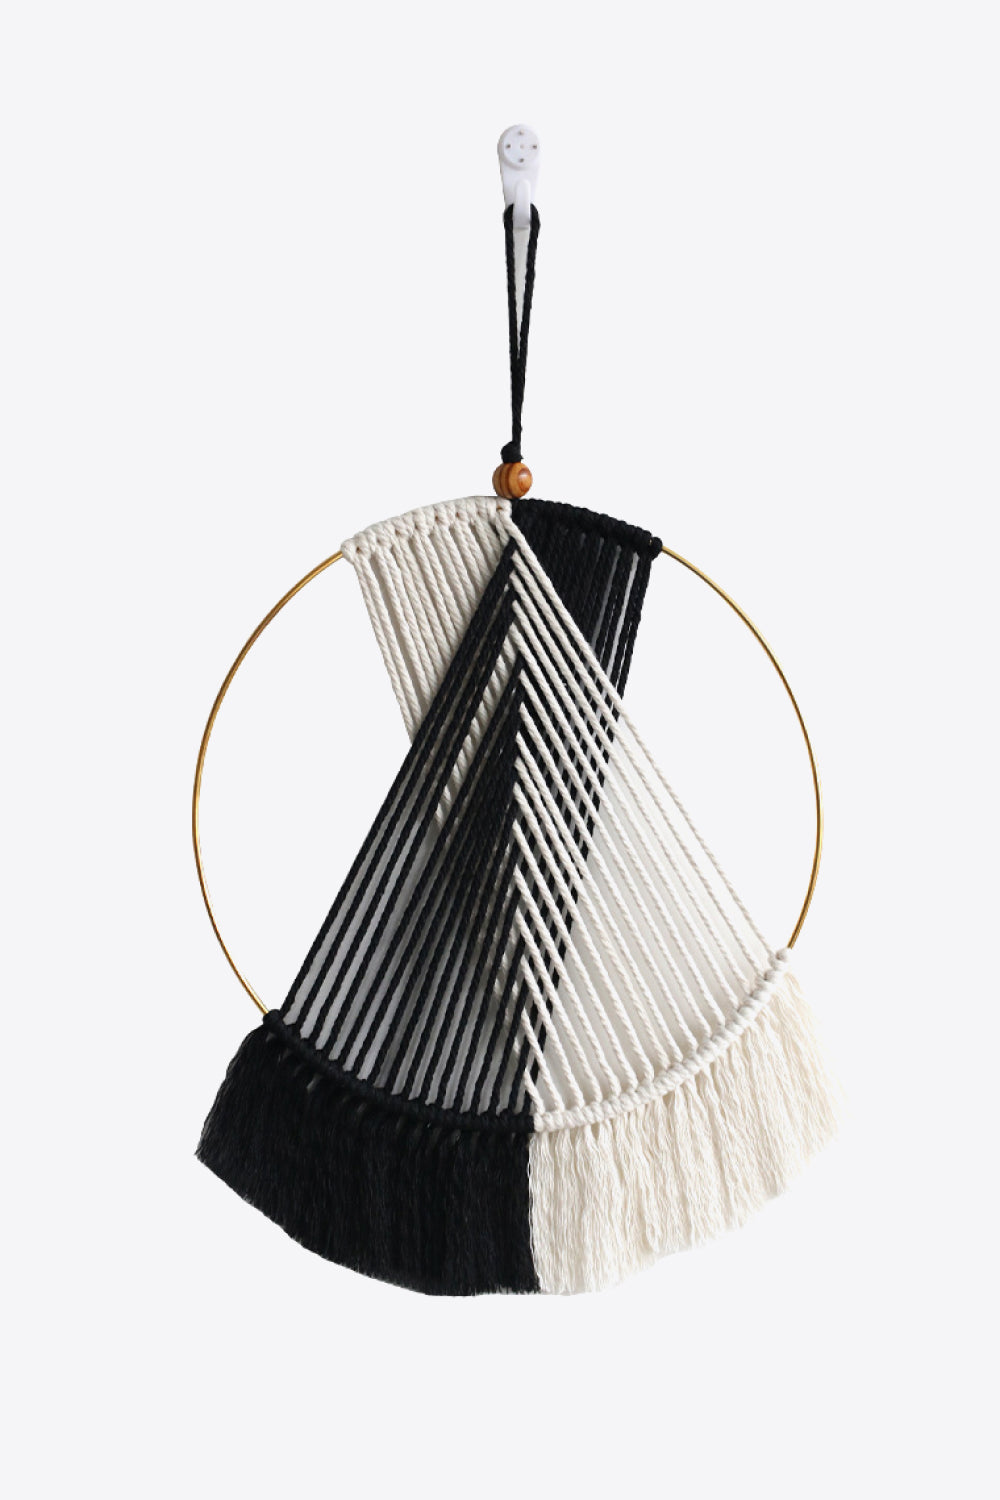 White Smoke Contrast Fringe Round Macrame Wall Hanging Sentient Beauty Fashions Home Decor